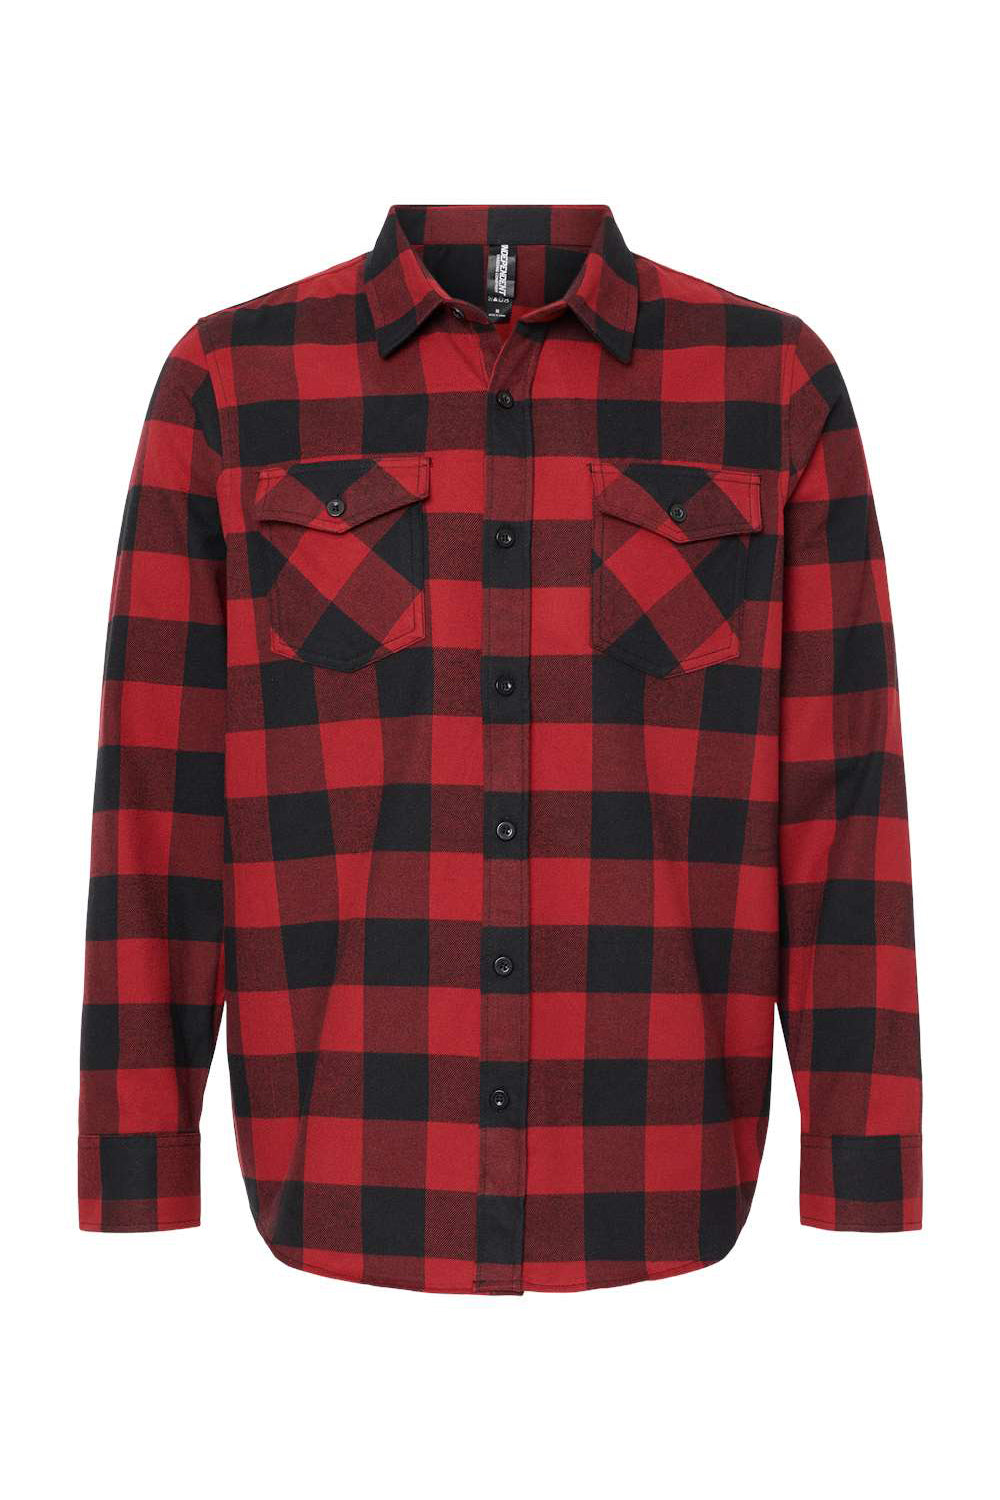 Independent Trading Co. EXP50F Mens Long Sleeve Button Down Flannel Shirt w/ Double Pockets Red/Black Flat Front